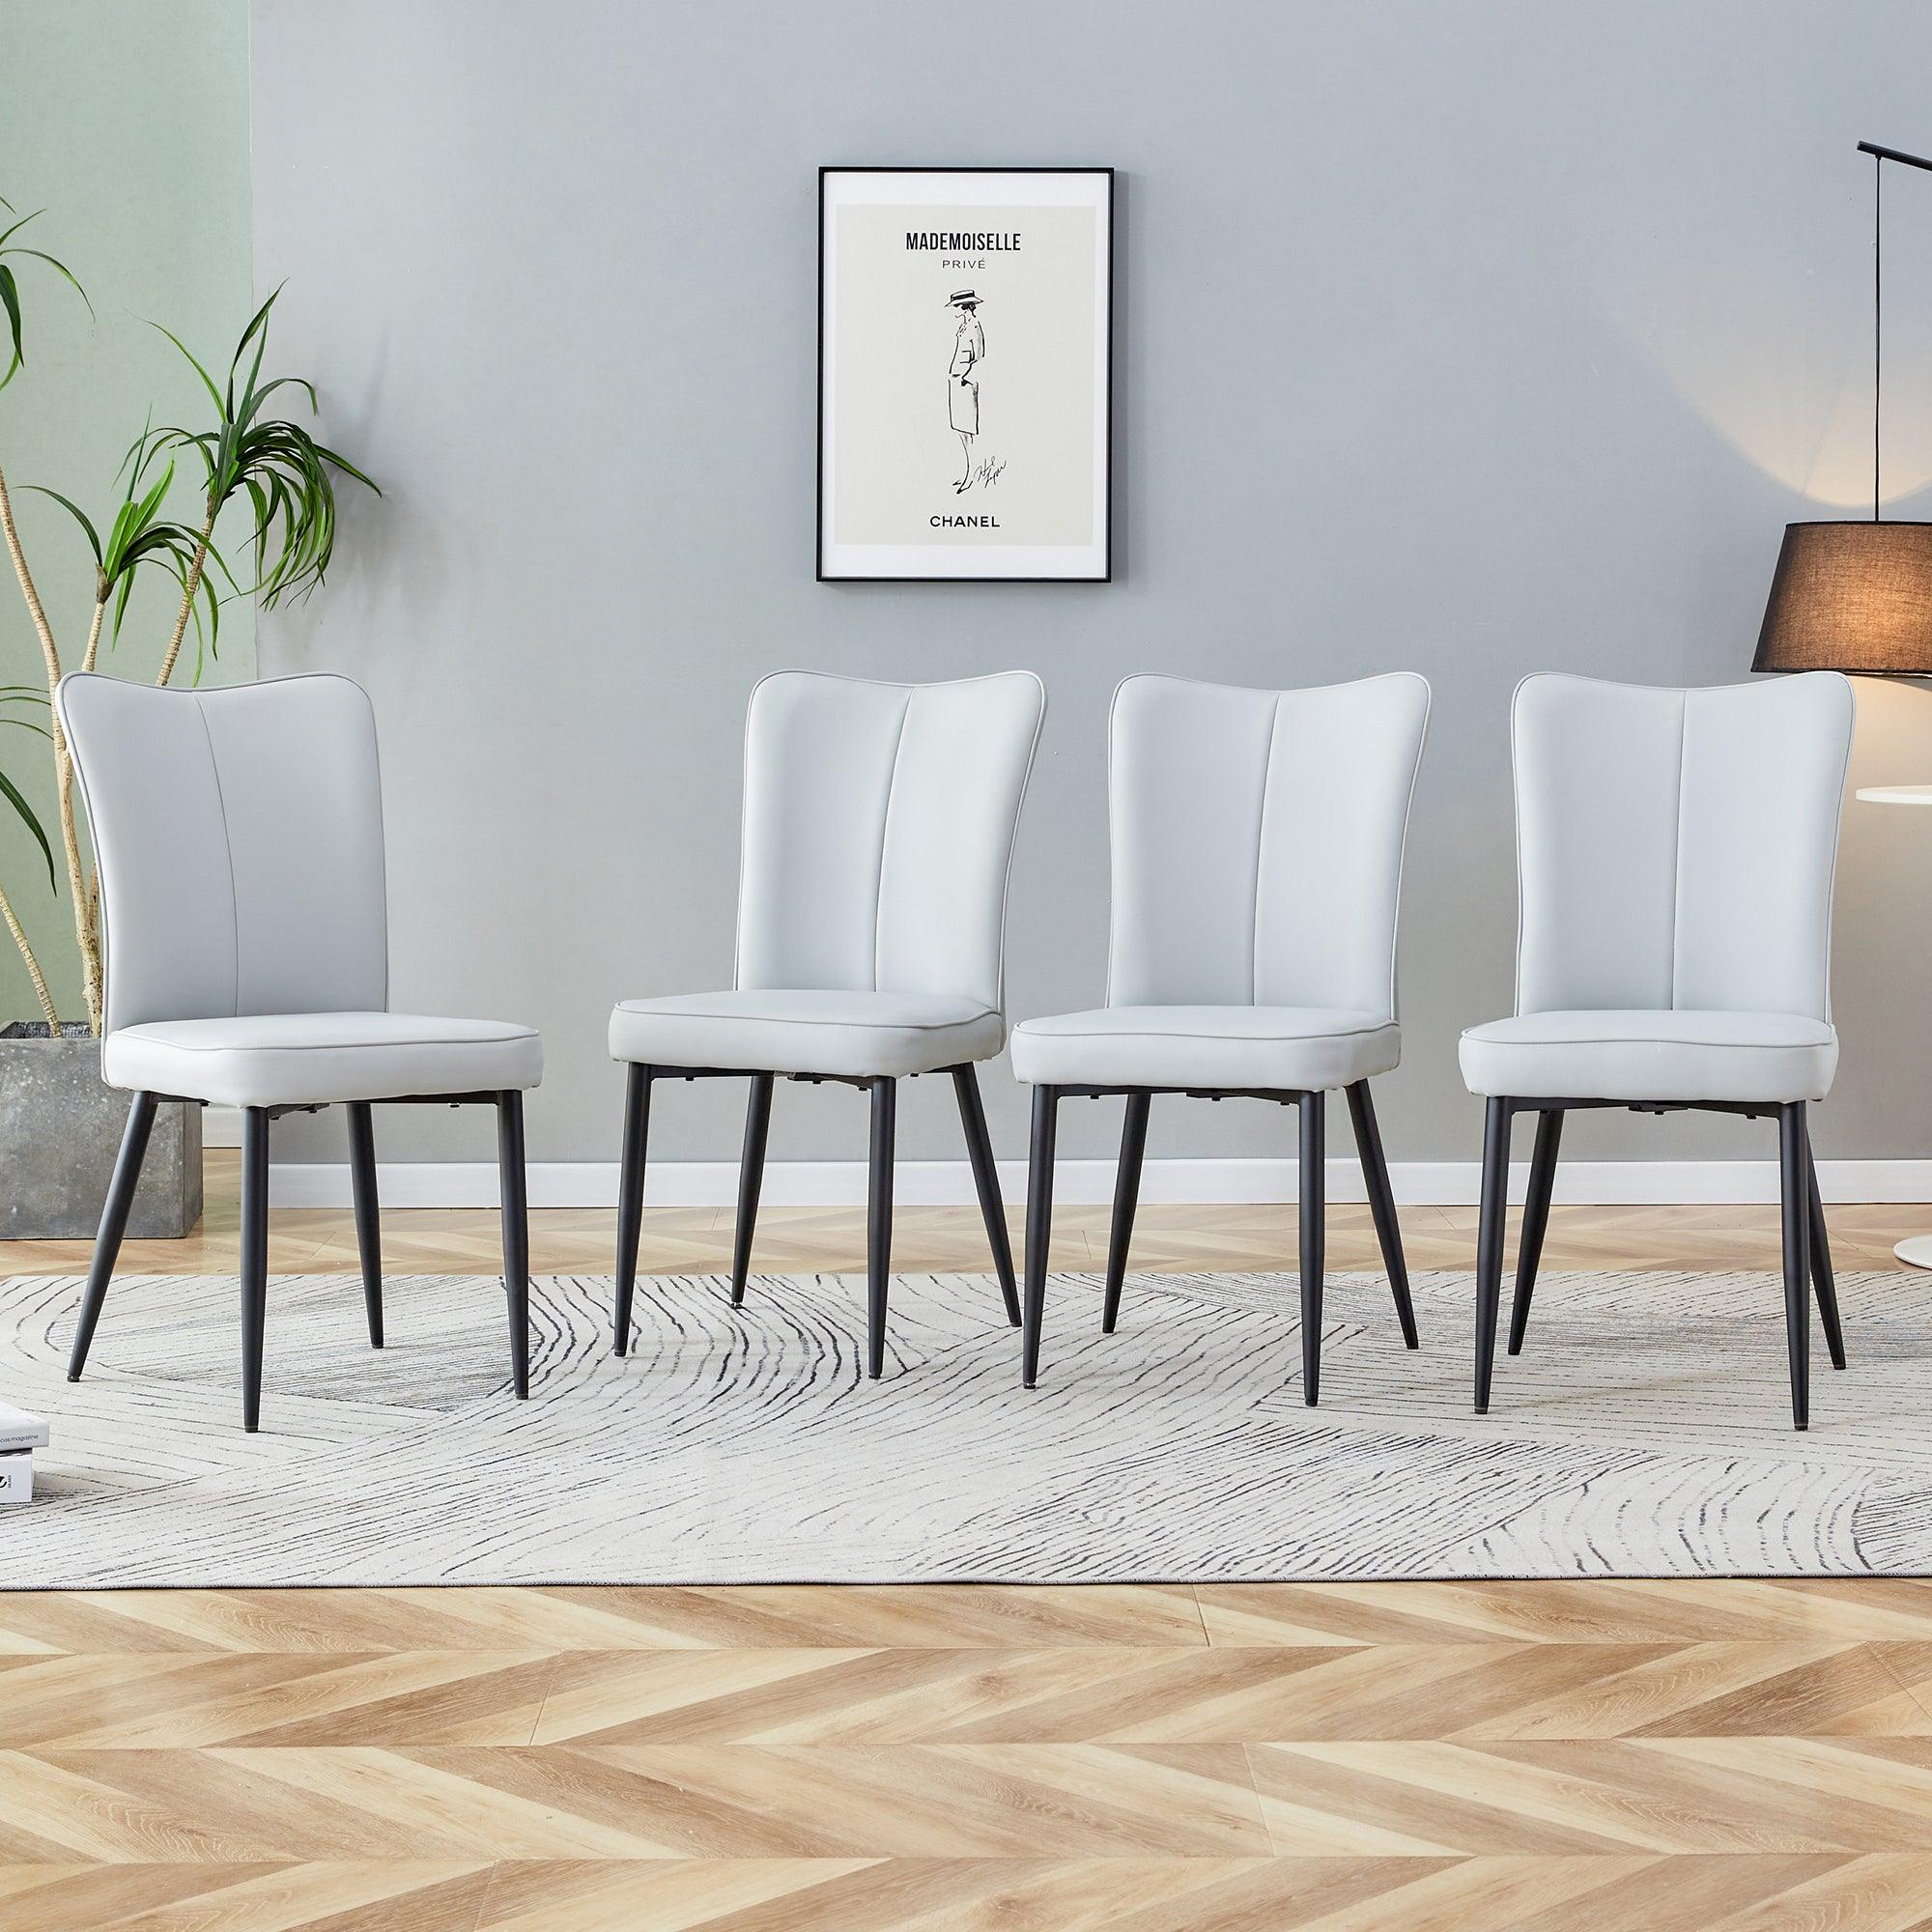 🆓🚛 Modern Minimalist Dining Chairs & Office Chairs 2-Piece Set Of Light Gray Pu Seats With Black Metal Legs Suitable for Restaurants, Living Rooms, & Offices.